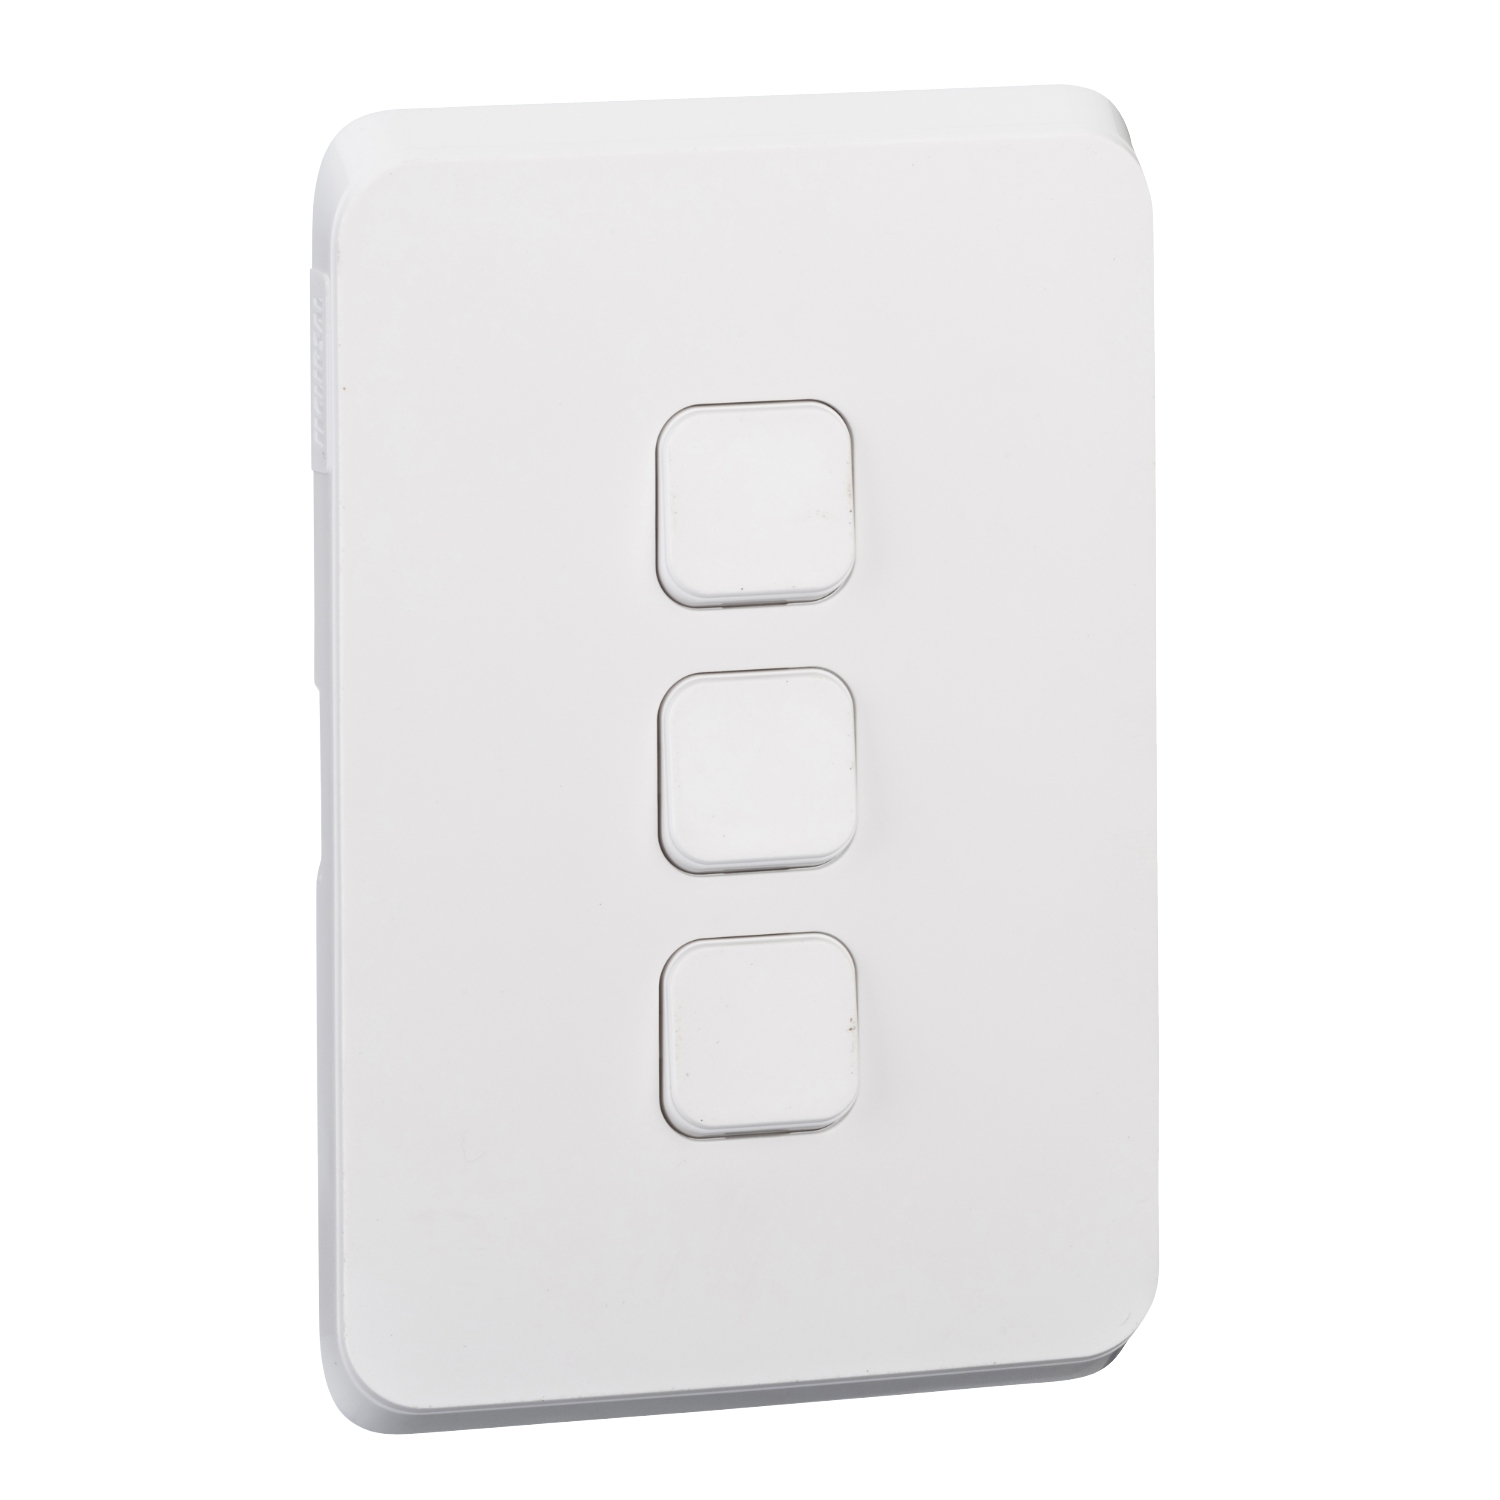 PDL Iconic - Cover Plate Switch 3-Gang - Solid White